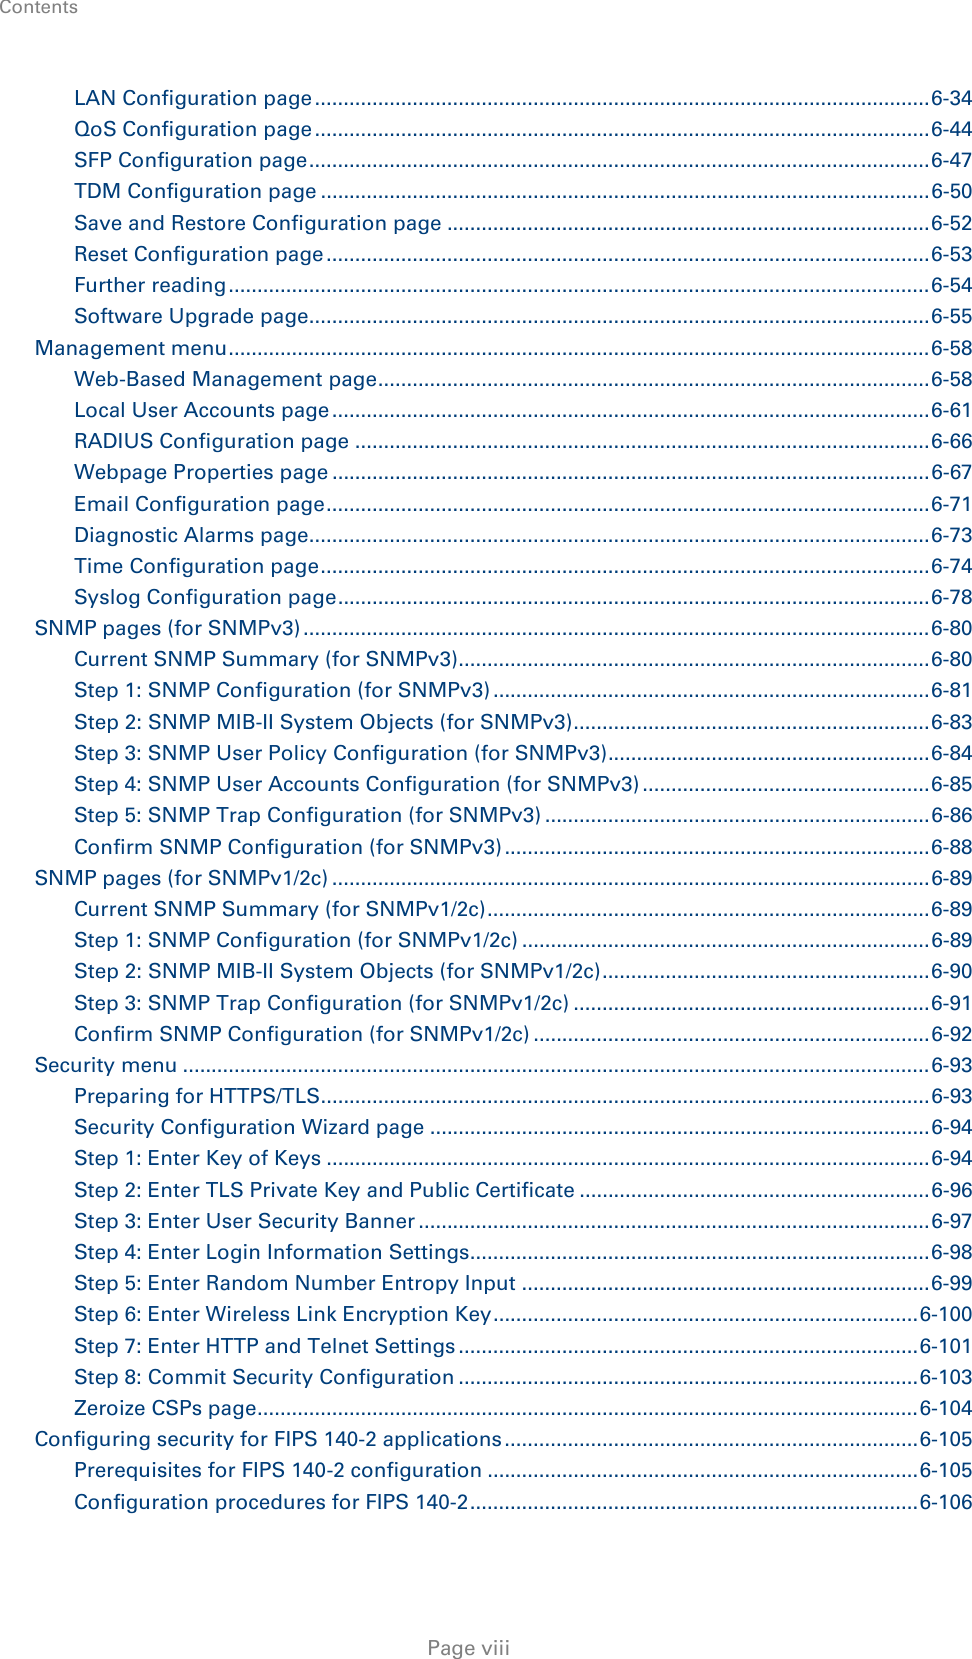 Contents    LAN Configuration page ........................................................................................................... 6-34 QoS Configuration page ........................................................................................................... 6-44 SFP Configuration page ............................................................................................................ 6-47 TDM Configuration page .......................................................................................................... 6-50 Save and Restore Configuration page .................................................................................... 6-52 Reset Configuration page ......................................................................................................... 6-53 Further reading .......................................................................................................................... 6-54 Software Upgrade page............................................................................................................ 6-55 Management menu .......................................................................................................................... 6-58 Web-Based Management page ................................................................................................ 6-58 Local User Accounts page ........................................................................................................ 6-61 RADIUS Configuration page .................................................................................................... 6-66 Webpage Properties page ........................................................................................................ 6-67 Email Configuration page ......................................................................................................... 6-71 Diagnostic Alarms page............................................................................................................ 6-73 Time Configuration page .......................................................................................................... 6-74 Syslog Configuration page ....................................................................................................... 6-78 SNMP pages (for SNMPv3) ............................................................................................................. 6-80 Current SNMP Summary (for SNMPv3) .................................................................................. 6-80 Step 1: SNMP Configuration (for SNMPv3) ............................................................................ 6-81 Step 2: SNMP MIB-II System Objects (for SNMPv3) .............................................................. 6-83 Step 3: SNMP User Policy Configuration (for SNMPv3) ........................................................ 6-84 Step 4: SNMP User Accounts Configuration (for SNMPv3) .................................................. 6-85 Step 5: SNMP Trap Configuration (for SNMPv3) ................................................................... 6-86 Confirm SNMP Configuration (for SNMPv3) .......................................................................... 6-88 SNMP pages (for SNMPv1/2c) ........................................................................................................ 6-89 Current SNMP Summary (for SNMPv1/2c) ............................................................................. 6-89 Step 1: SNMP Configuration (for SNMPv1/2c) ....................................................................... 6-89 Step 2: SNMP MIB-II System Objects (for SNMPv1/2c) ......................................................... 6-90 Step 3: SNMP Trap Configuration (for SNMPv1/2c) .............................................................. 6-91 Confirm SNMP Configuration (for SNMPv1/2c) ..................................................................... 6-92 Security menu .................................................................................................................................. 6-93 Preparing for HTTPS/TLS.......................................................................................................... 6-93 Security Configuration Wizard page ....................................................................................... 6-94 Step 1: Enter Key of Keys ......................................................................................................... 6-94 Step 2: Enter TLS Private Key and Public Certificate ............................................................. 6-96 Step 3: Enter User Security Banner ......................................................................................... 6-97 Step 4: Enter Login Information Settings................................................................................ 6-98 Step 5: Enter Random Number Entropy Input ....................................................................... 6-99 Step 6: Enter Wireless Link Encryption Key .......................................................................... 6-100 Step 7: Enter HTTP and Telnet Settings ................................................................................ 6-101 Step 8: Commit Security Configuration ................................................................................ 6-103 Zeroize CSPs page ................................................................................................................... 6-104 Configuring security for FIPS 140-2 applications ........................................................................ 6-105 Prerequisites for FIPS 140-2 configuration ........................................................................... 6-105 Configuration procedures for FIPS 140-2 .............................................................................. 6-106  Page viii 